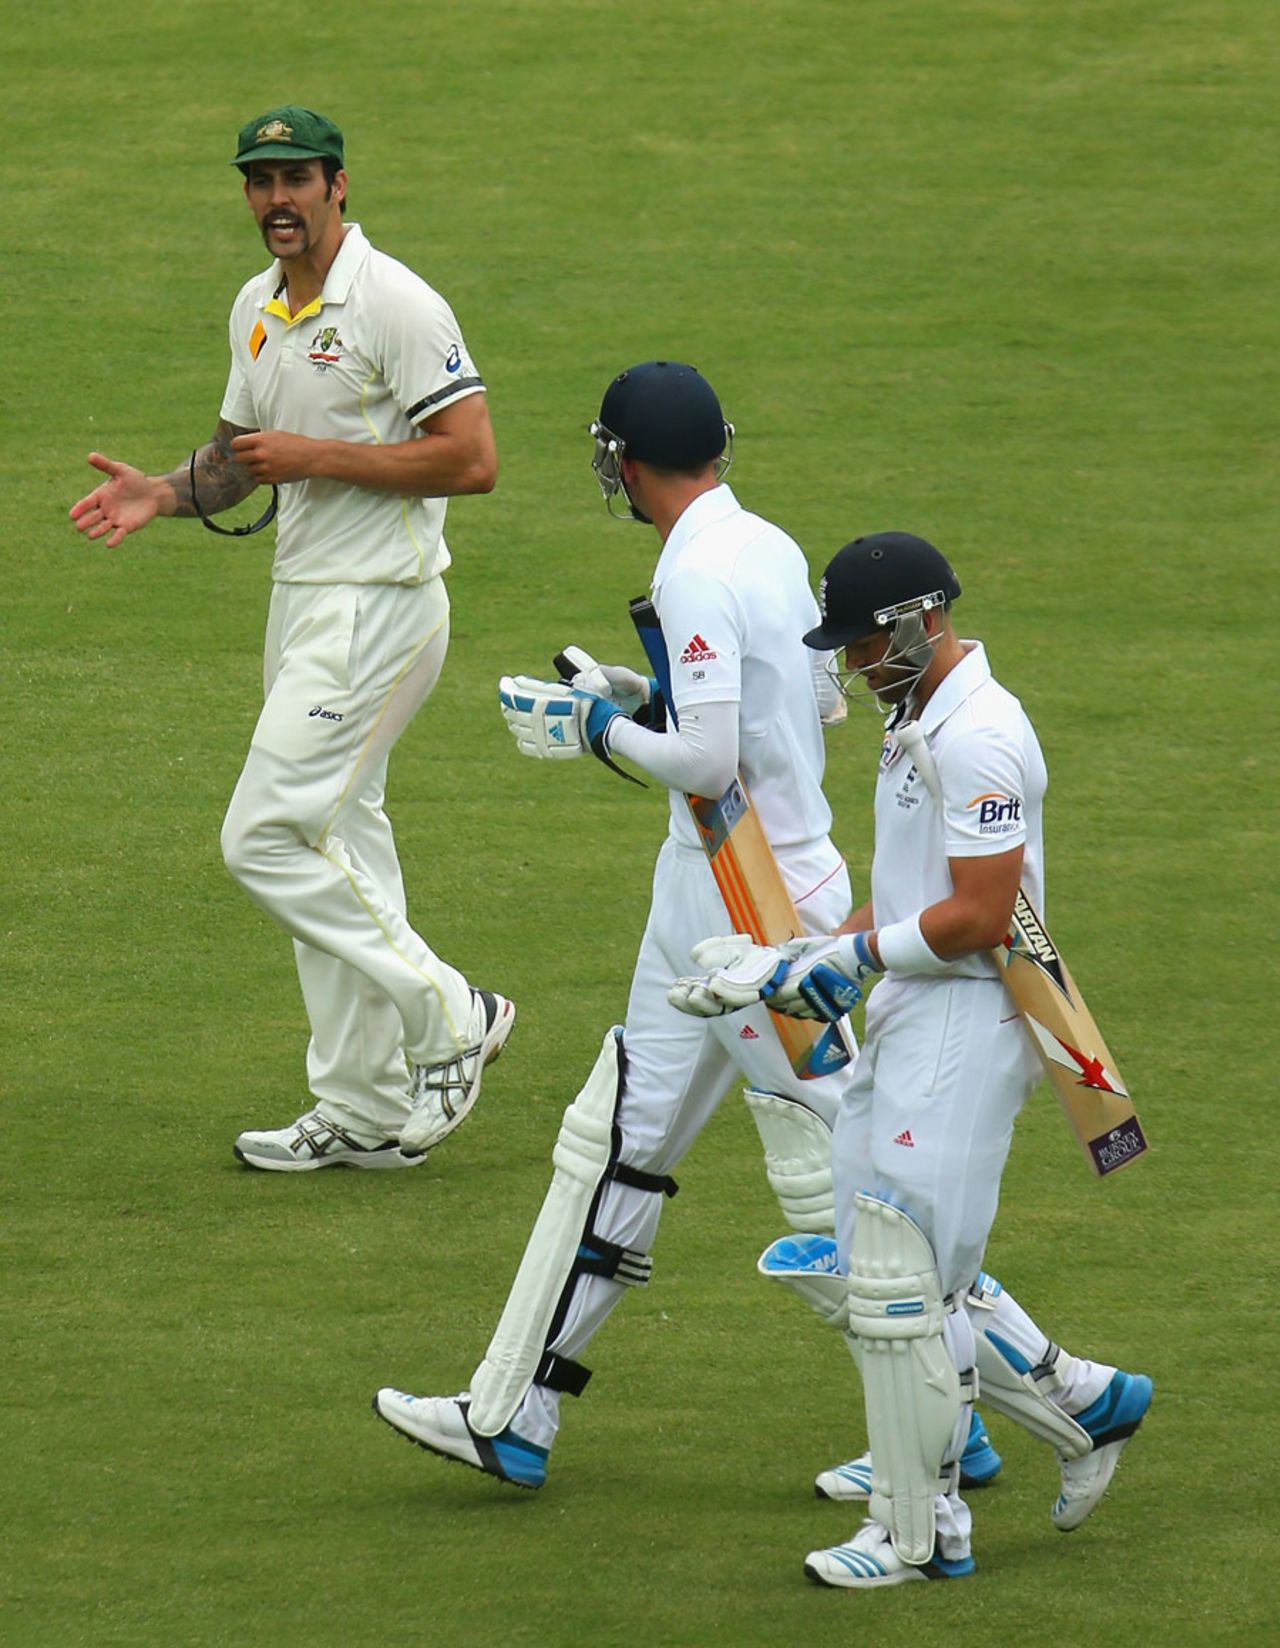 Mitchell Johnson and Stuart Broad continued their discussion after the close, Australia v England, 2nd Test, Adelaide, 4th day, December 8, 2013